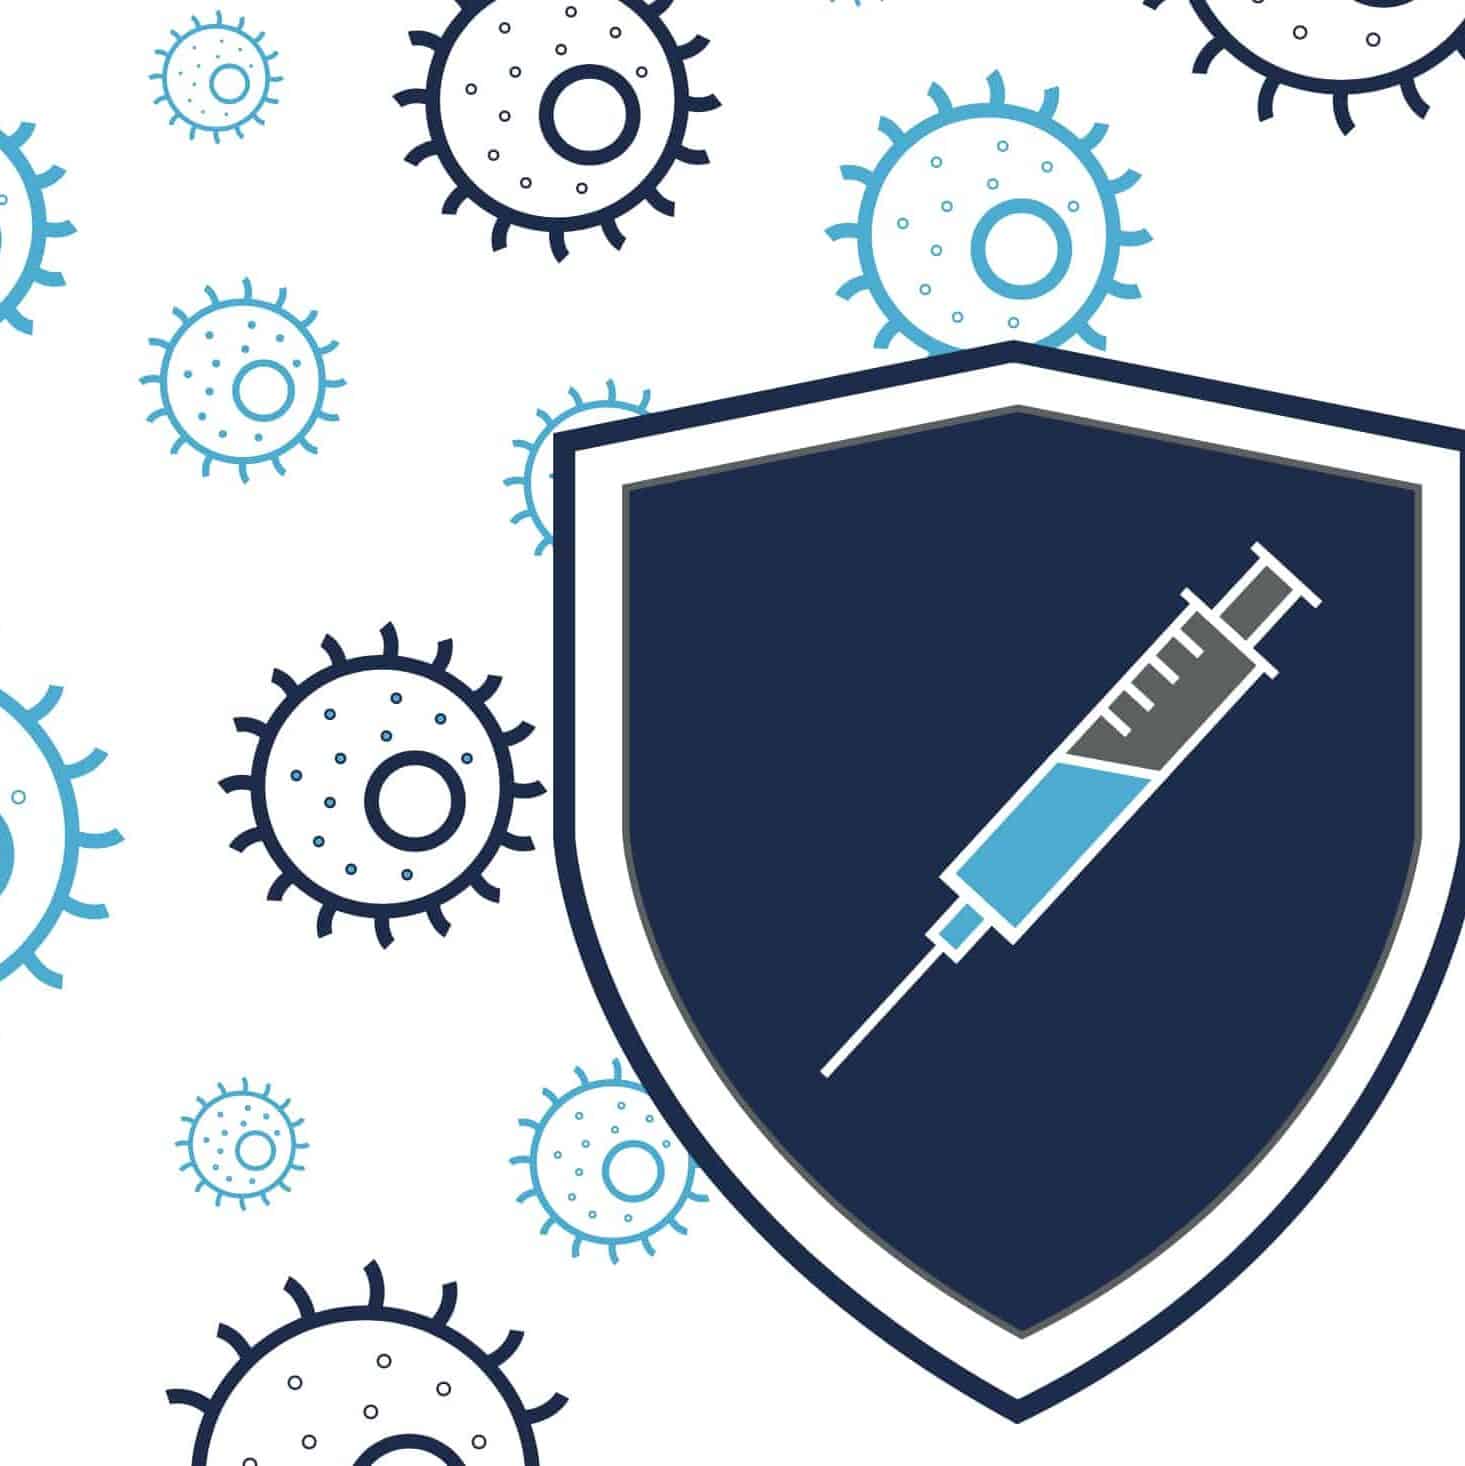 Illustration of a vaccine syringe on a shield